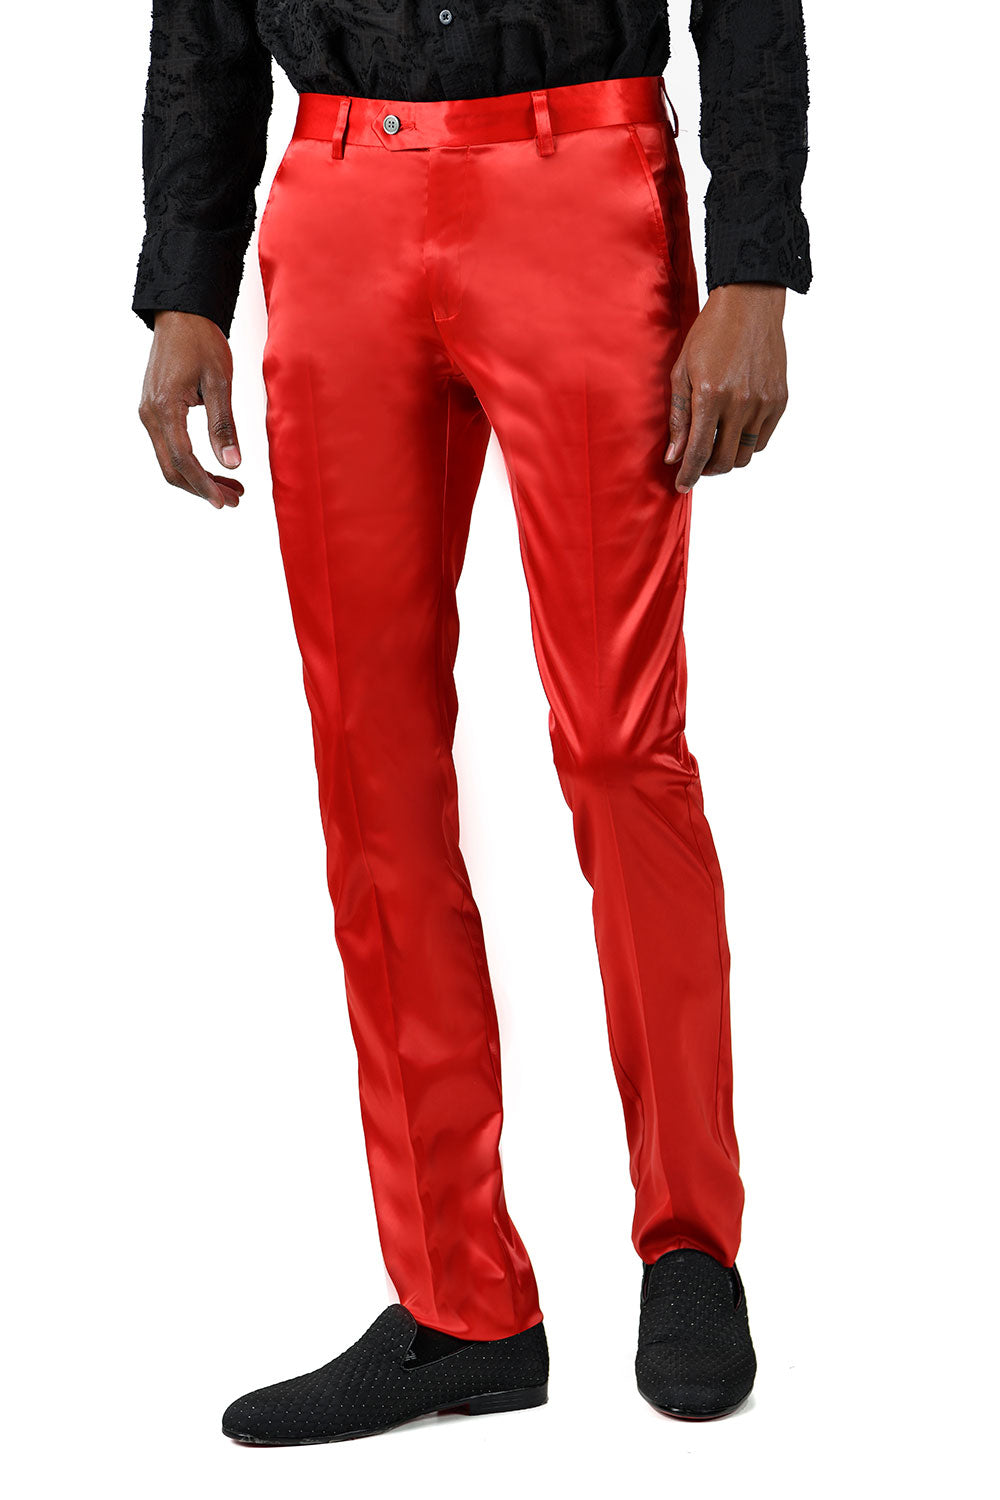 BARABAS Men's Solid Color Shiny Chino Pants VP1010 Red